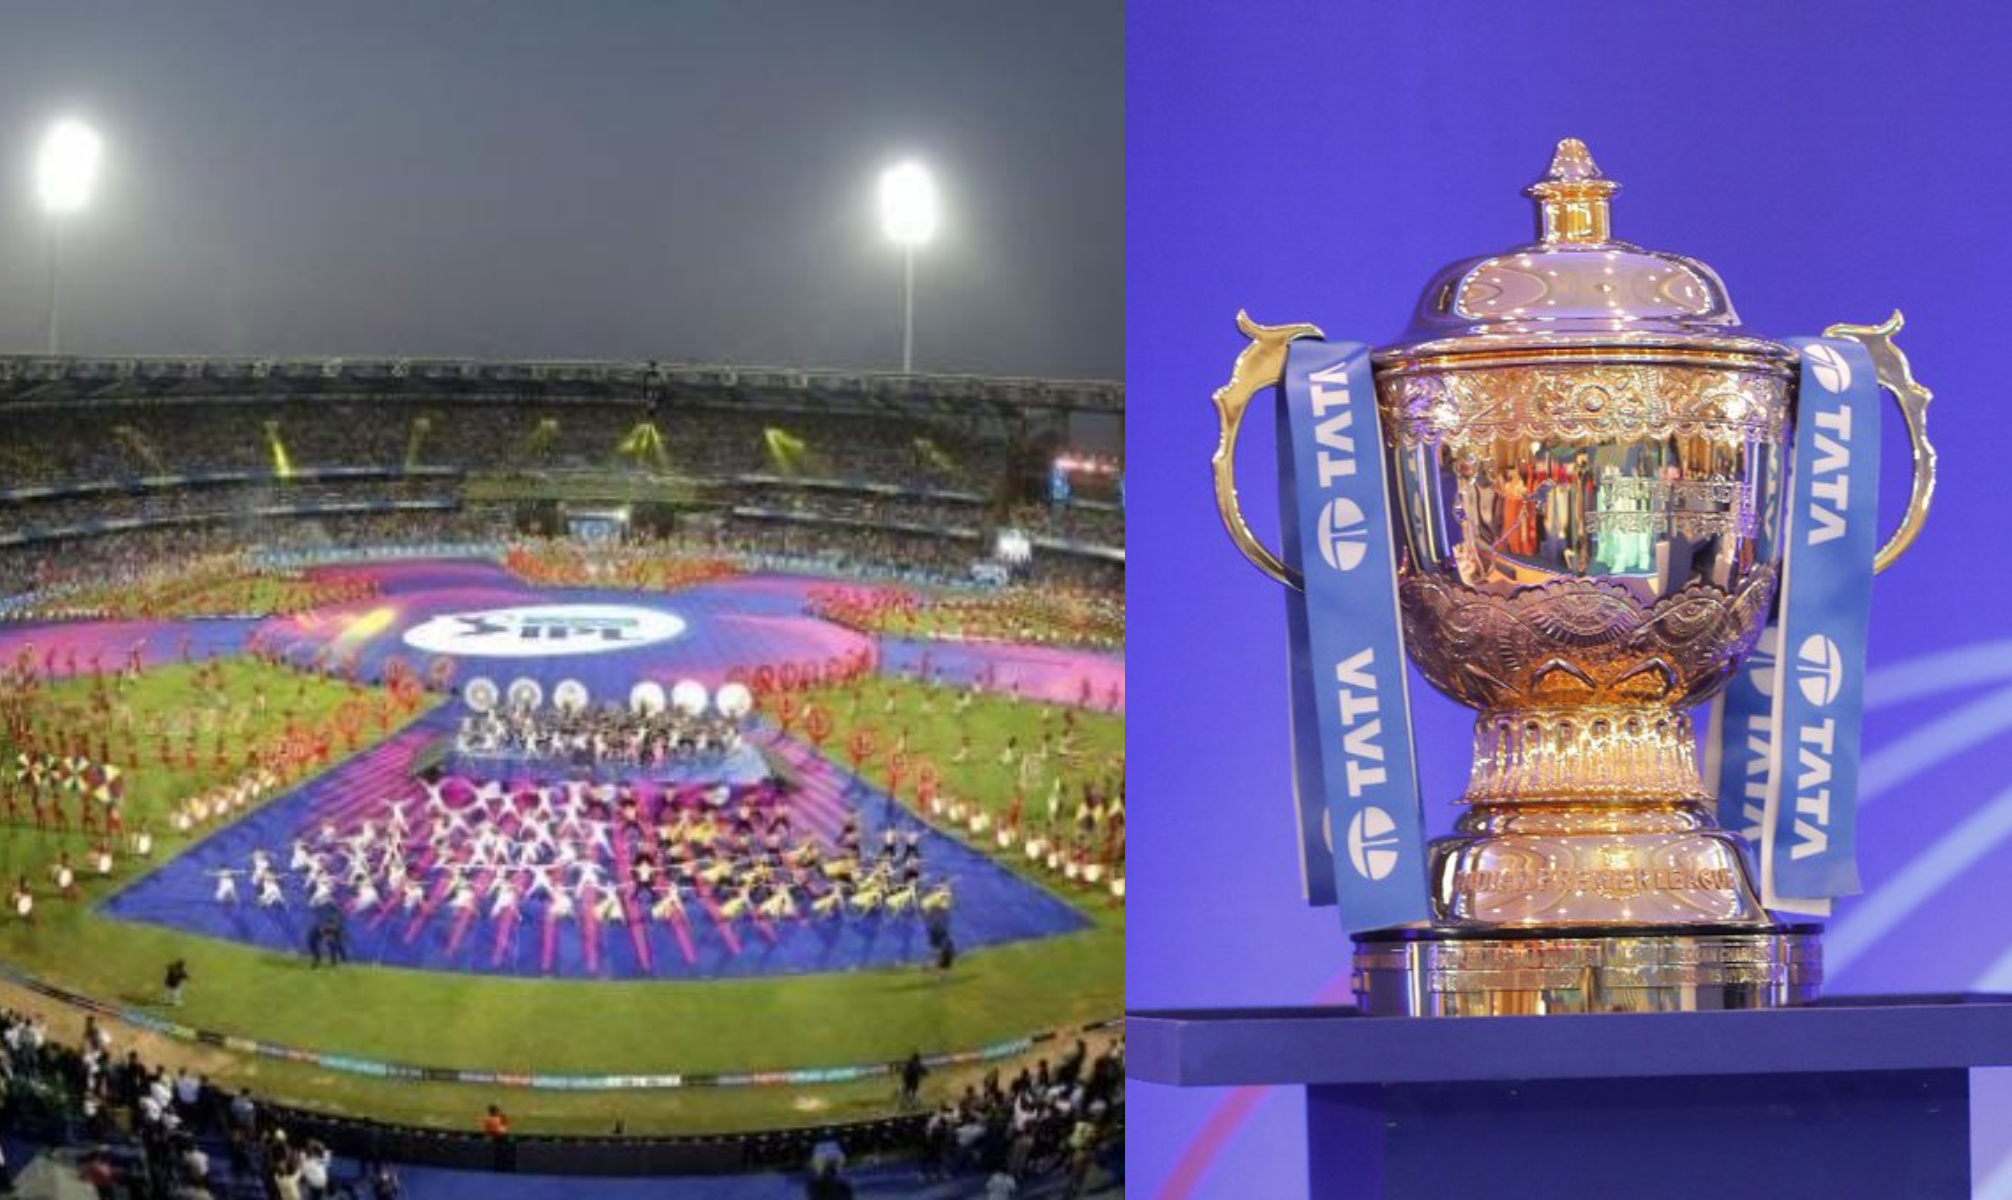 IPL 2022 final will be played on May 29